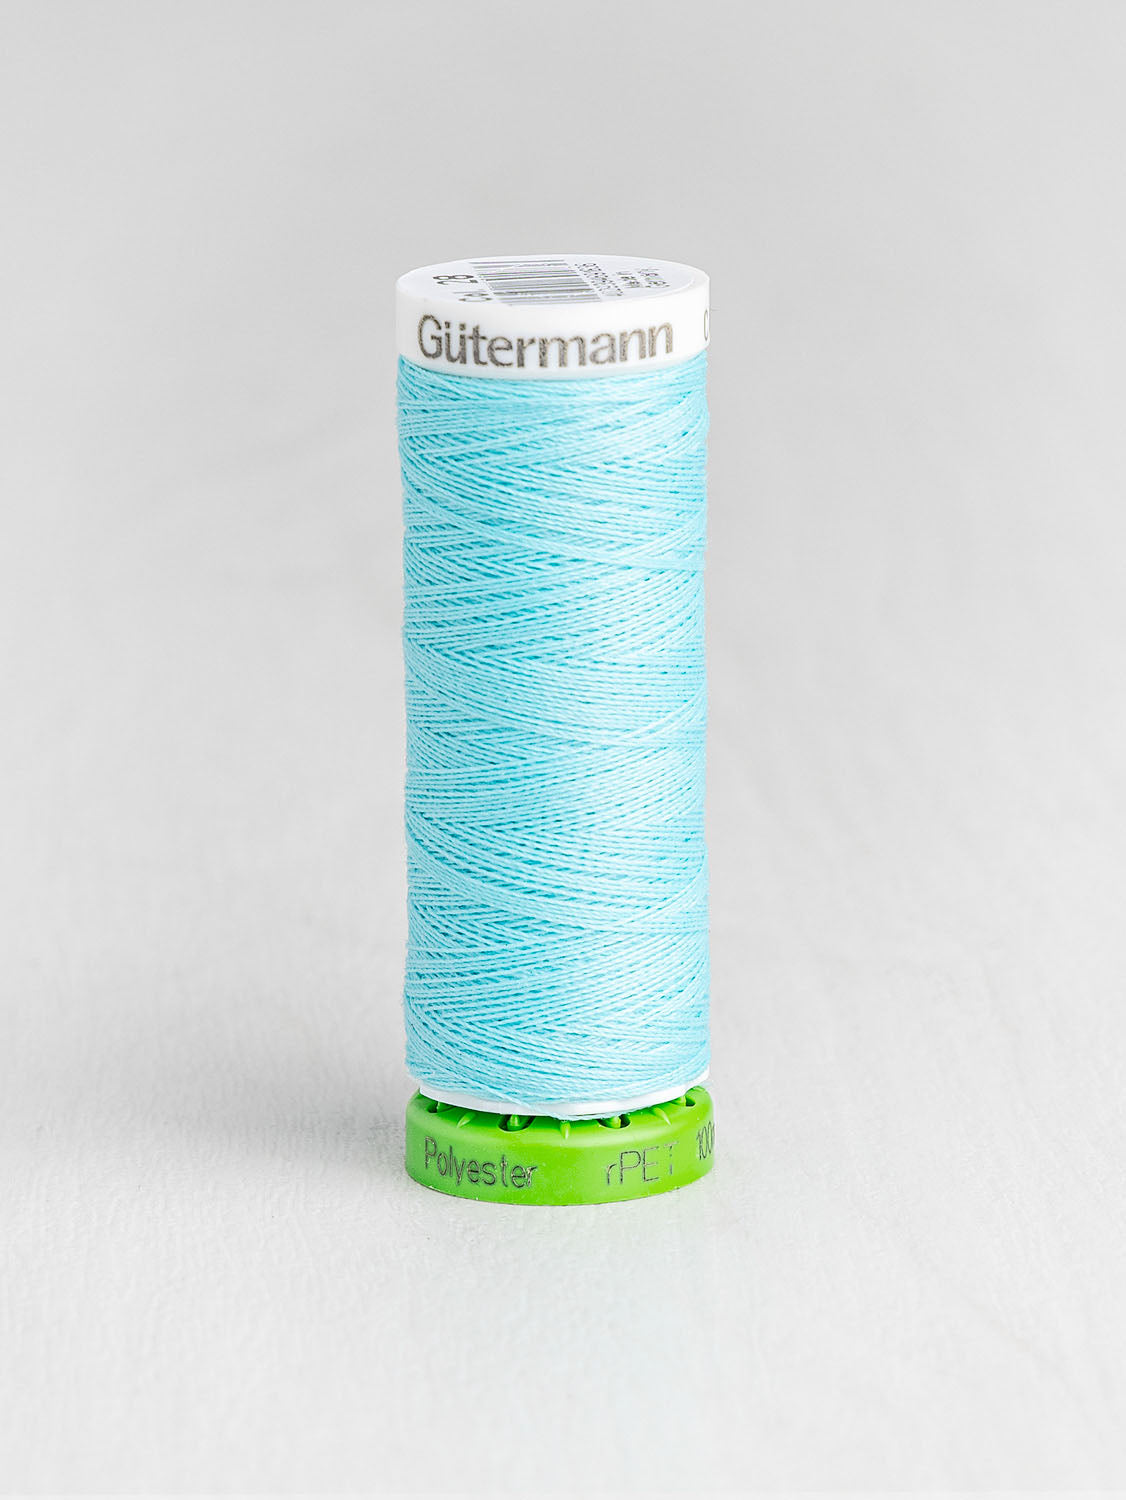 Gütermann All Purpose rPET Recycled Thread - Blue Cotton Candy 028 | Core Fabrics